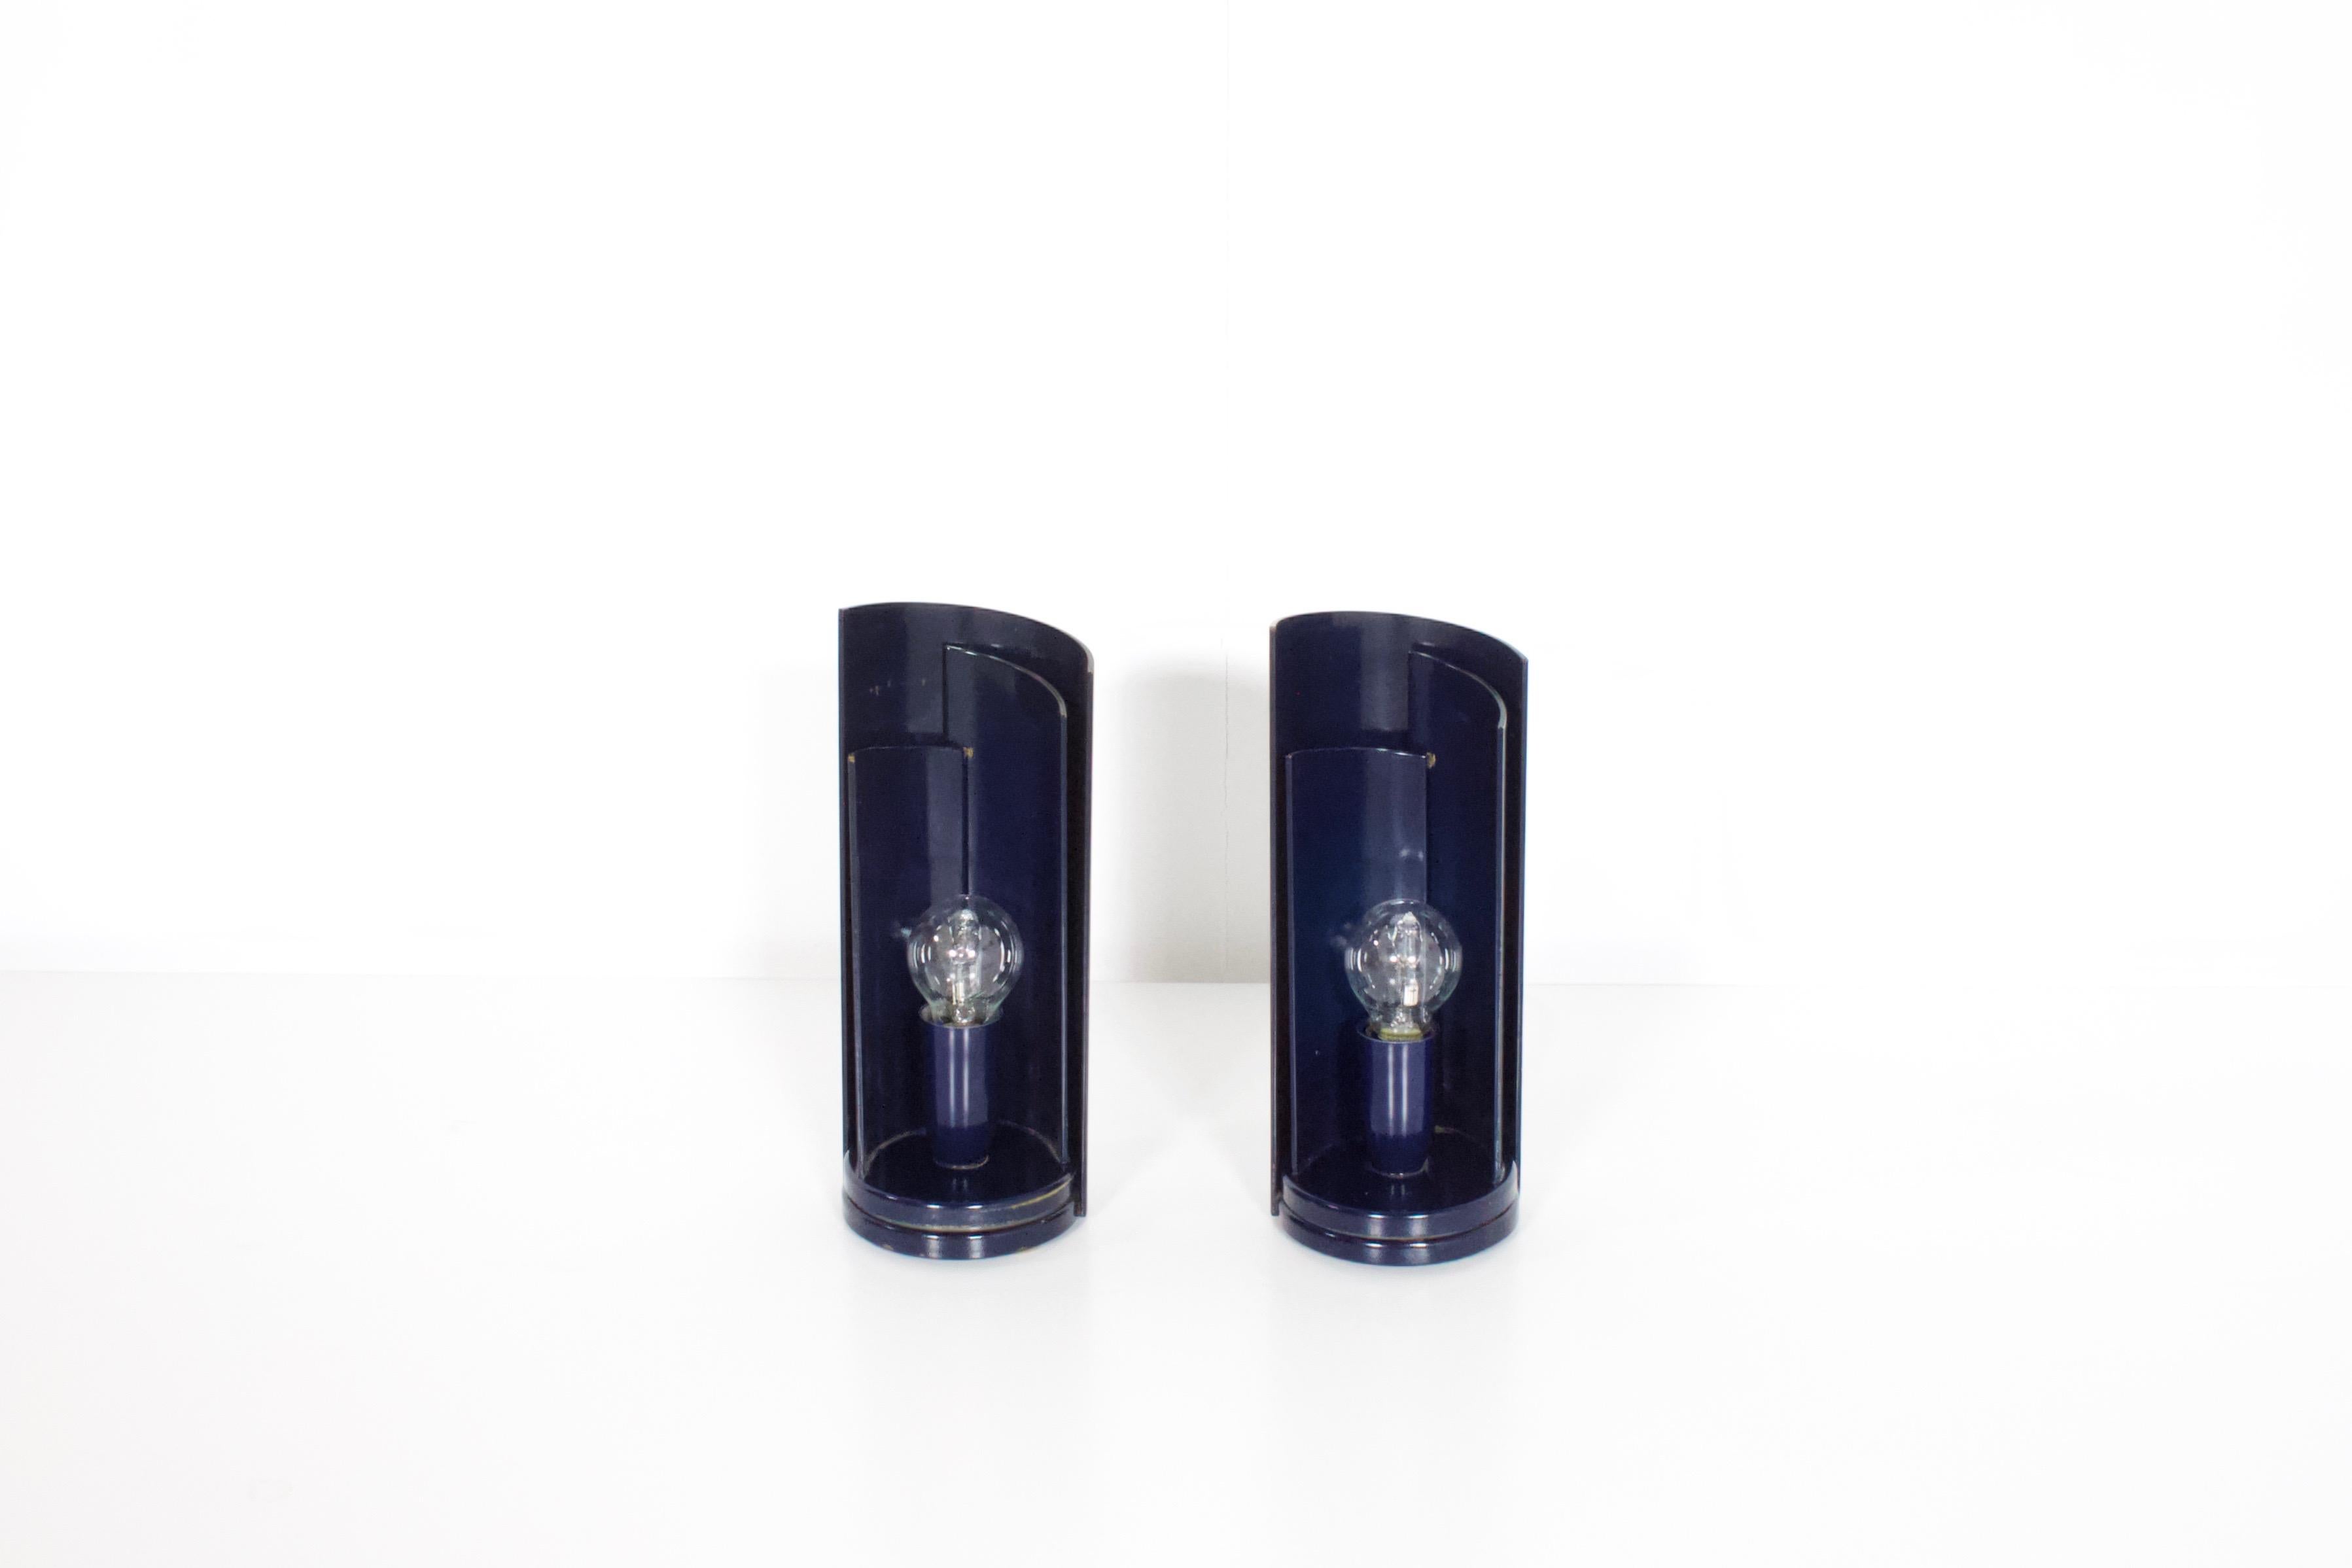 Two ‘eclipse’ table lamps in vey good condition.

These lamps are made of metal en lacquered in a dark blue color.

They have fins that can be rotated, by rotating them you can adjust the amount light.

One light socket per